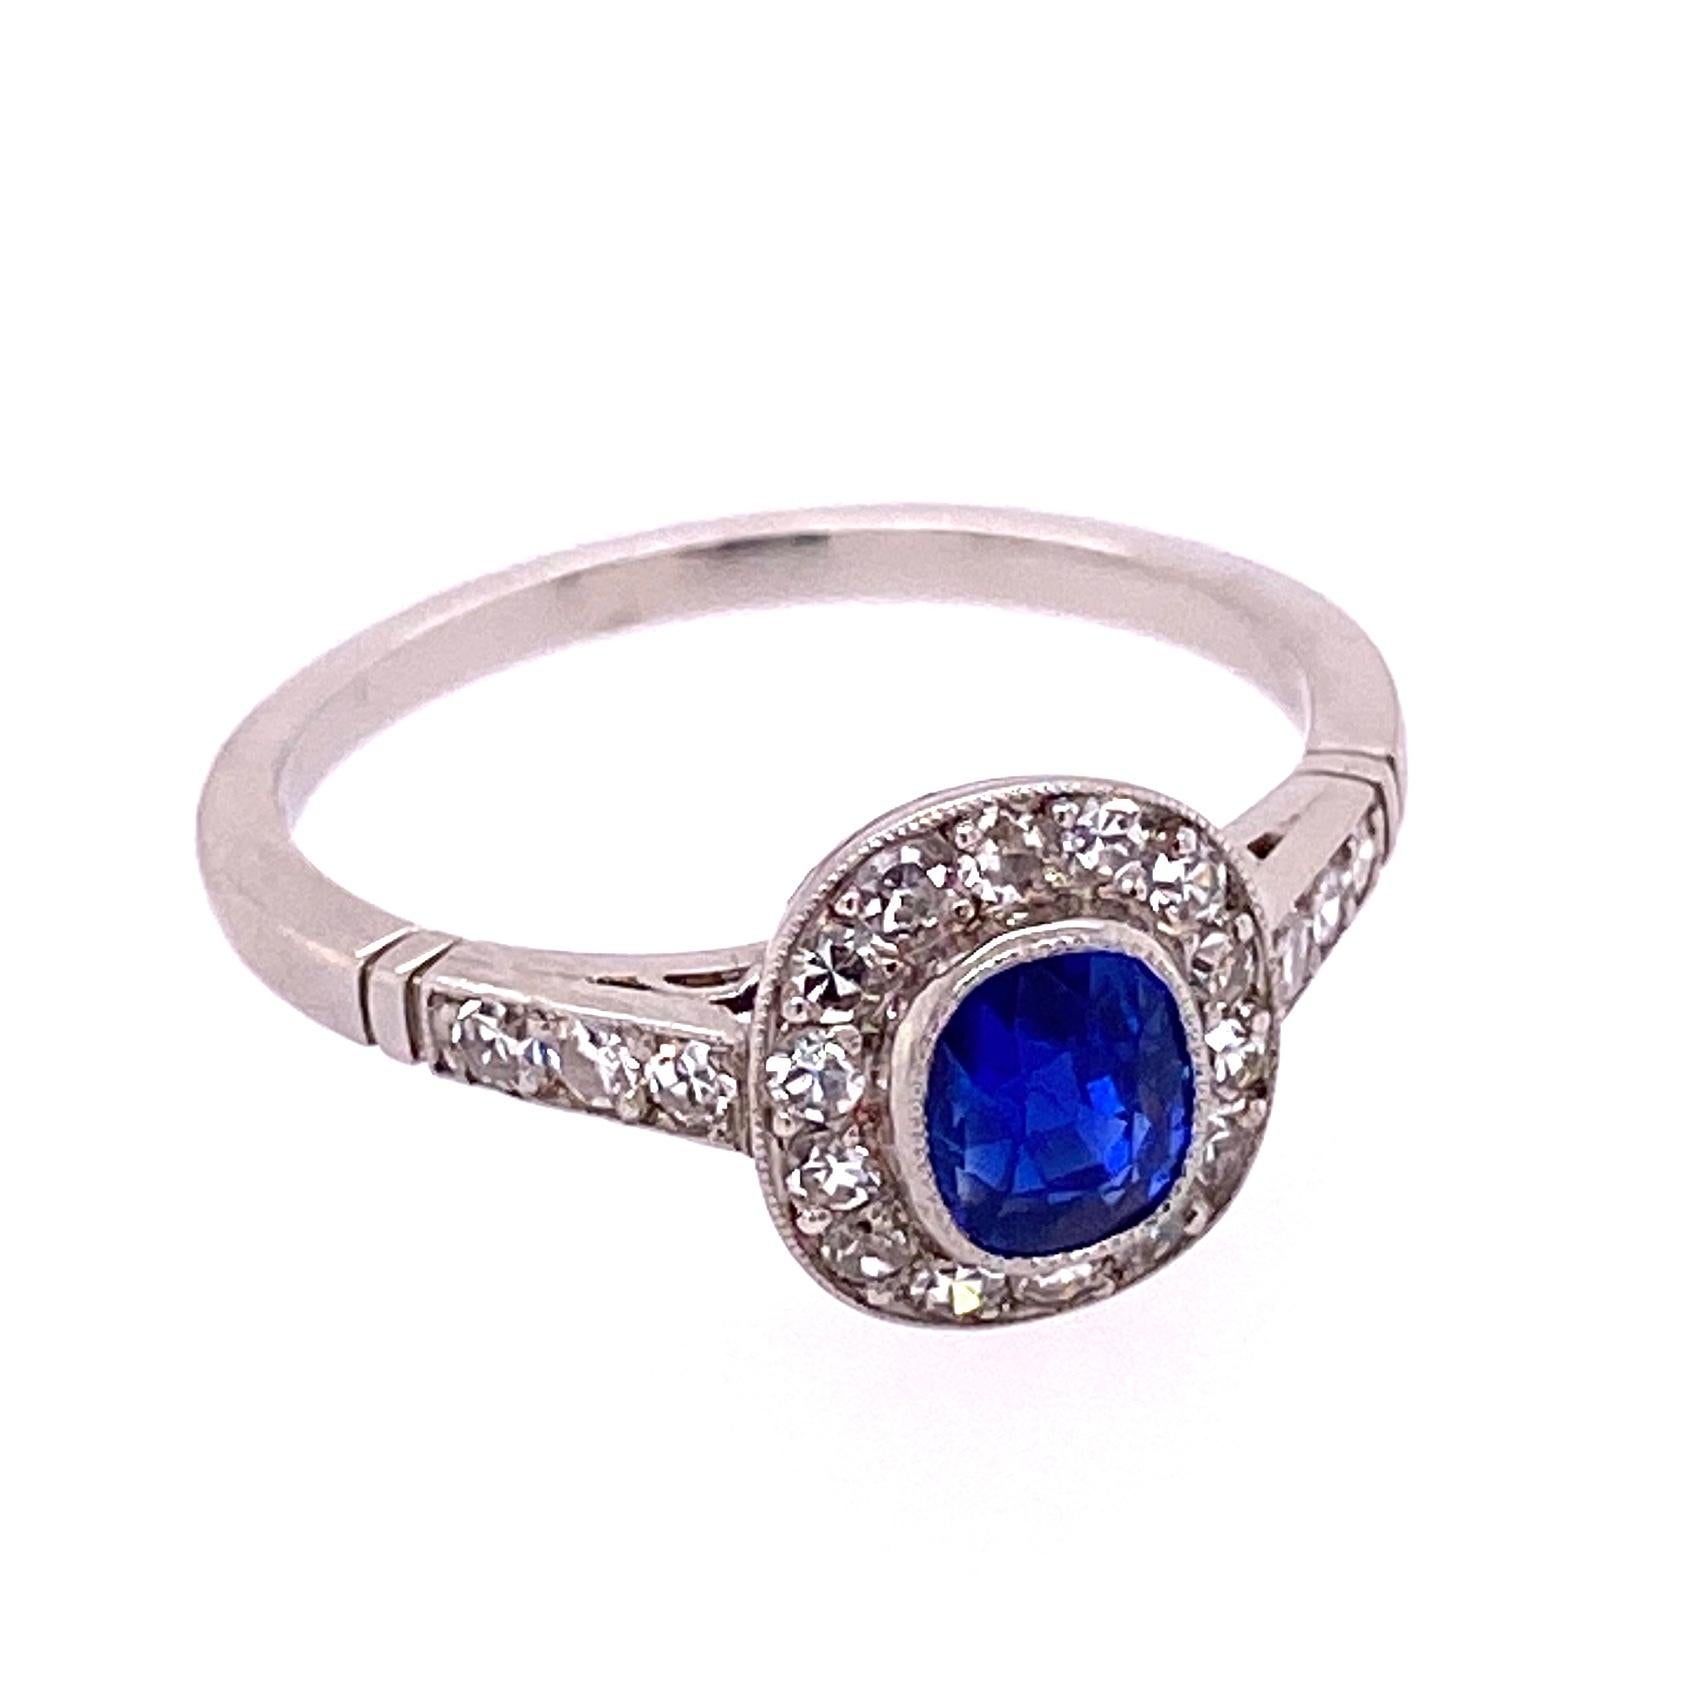 Beautiful, Elegant and finely detailed Edwardian Platinum Engagement Ring, center securely nestled with a Kashmir No Heat Blue Sapphire, GIA #2205902539, weighing approx. 0.99 Carats; surrounded by Diamonds and small Diamonds enhancing the shank;